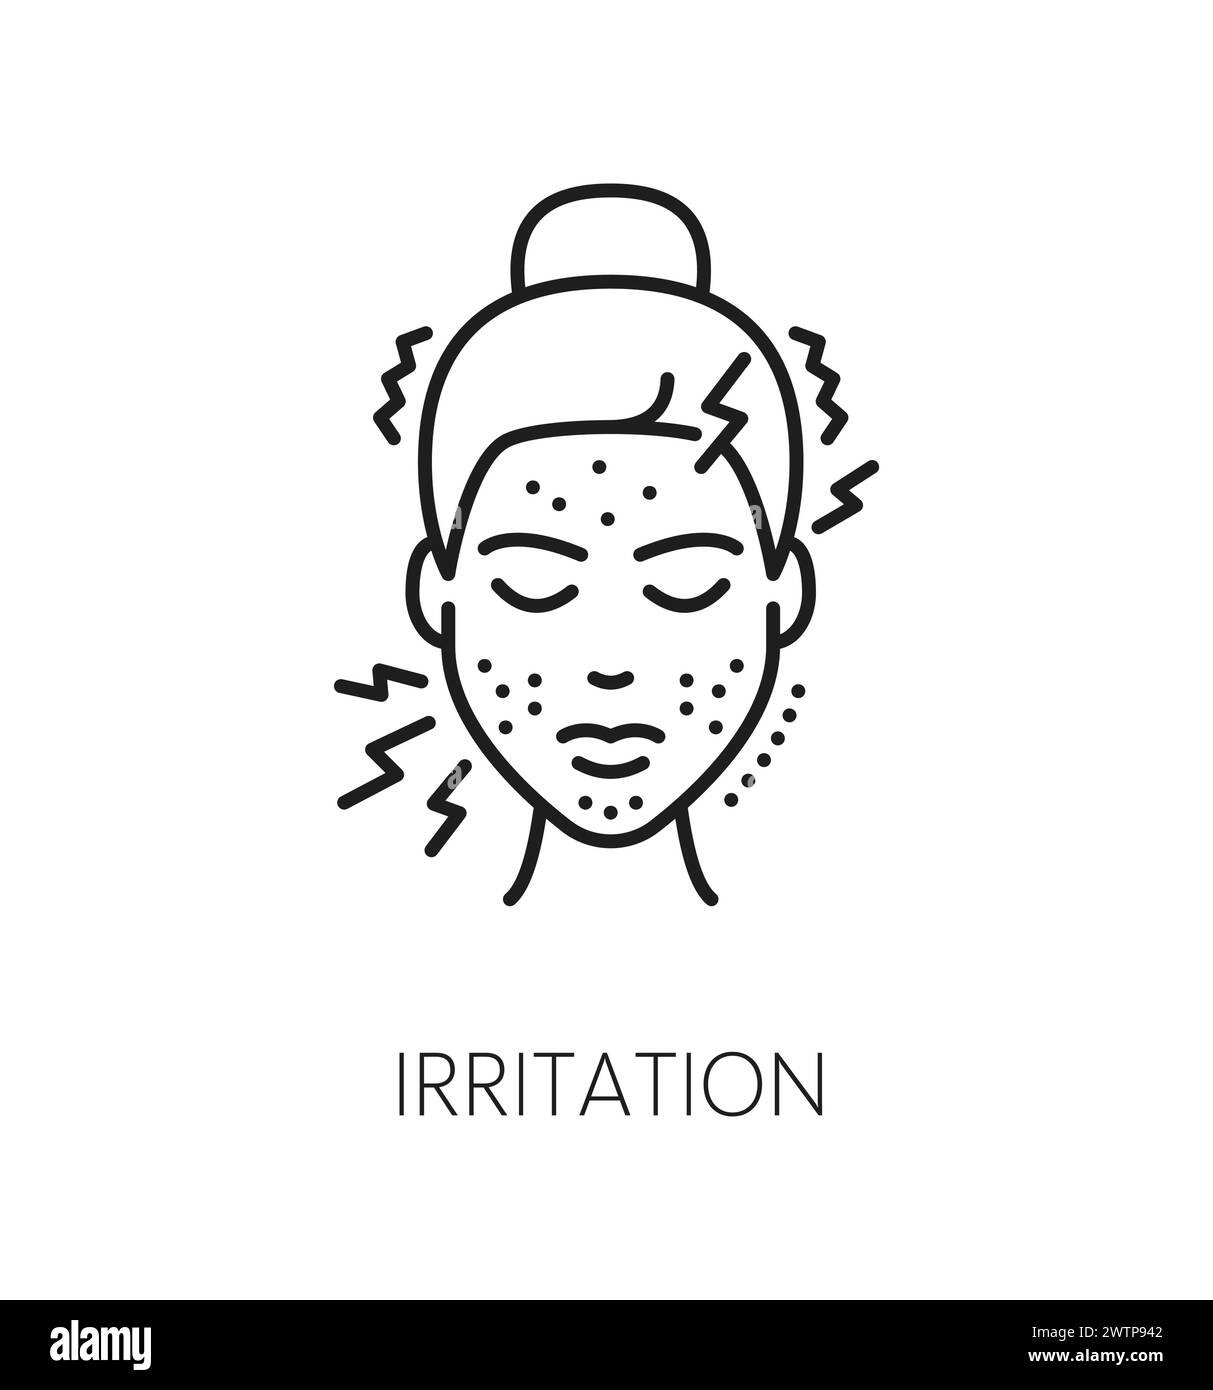 Irritation cosmetology icon. Face care, cosmetology, and skincare isolated vector sign depicts distressed face with redness, emphasizing the need for soothing treatments and gentle skin care practices Stock Vector